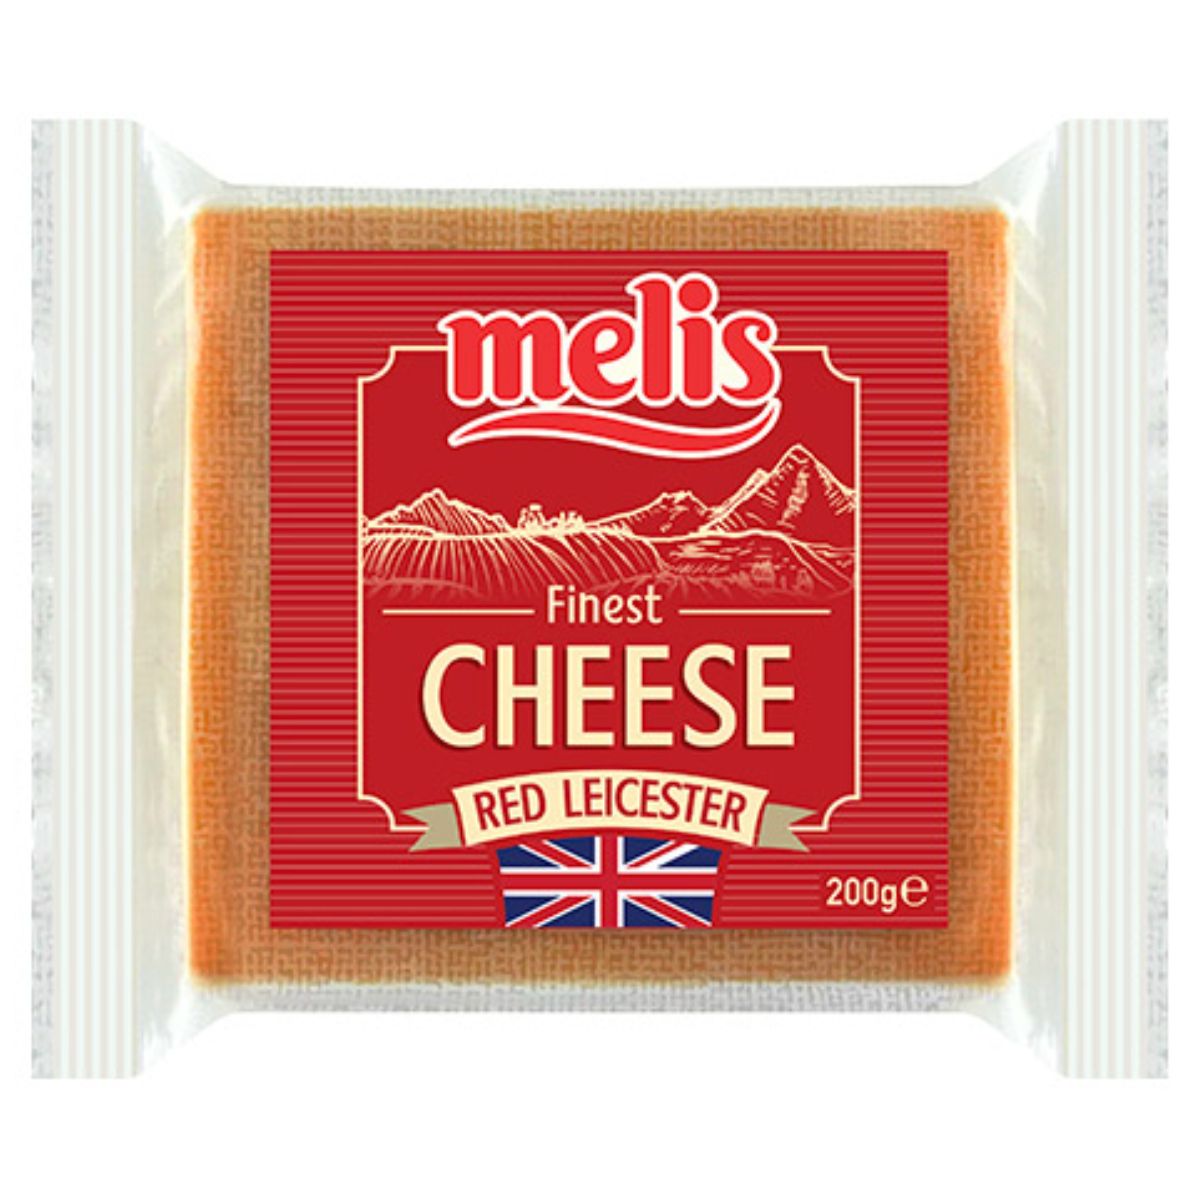 Melis's finest Cheese Red Leicester - 200g.